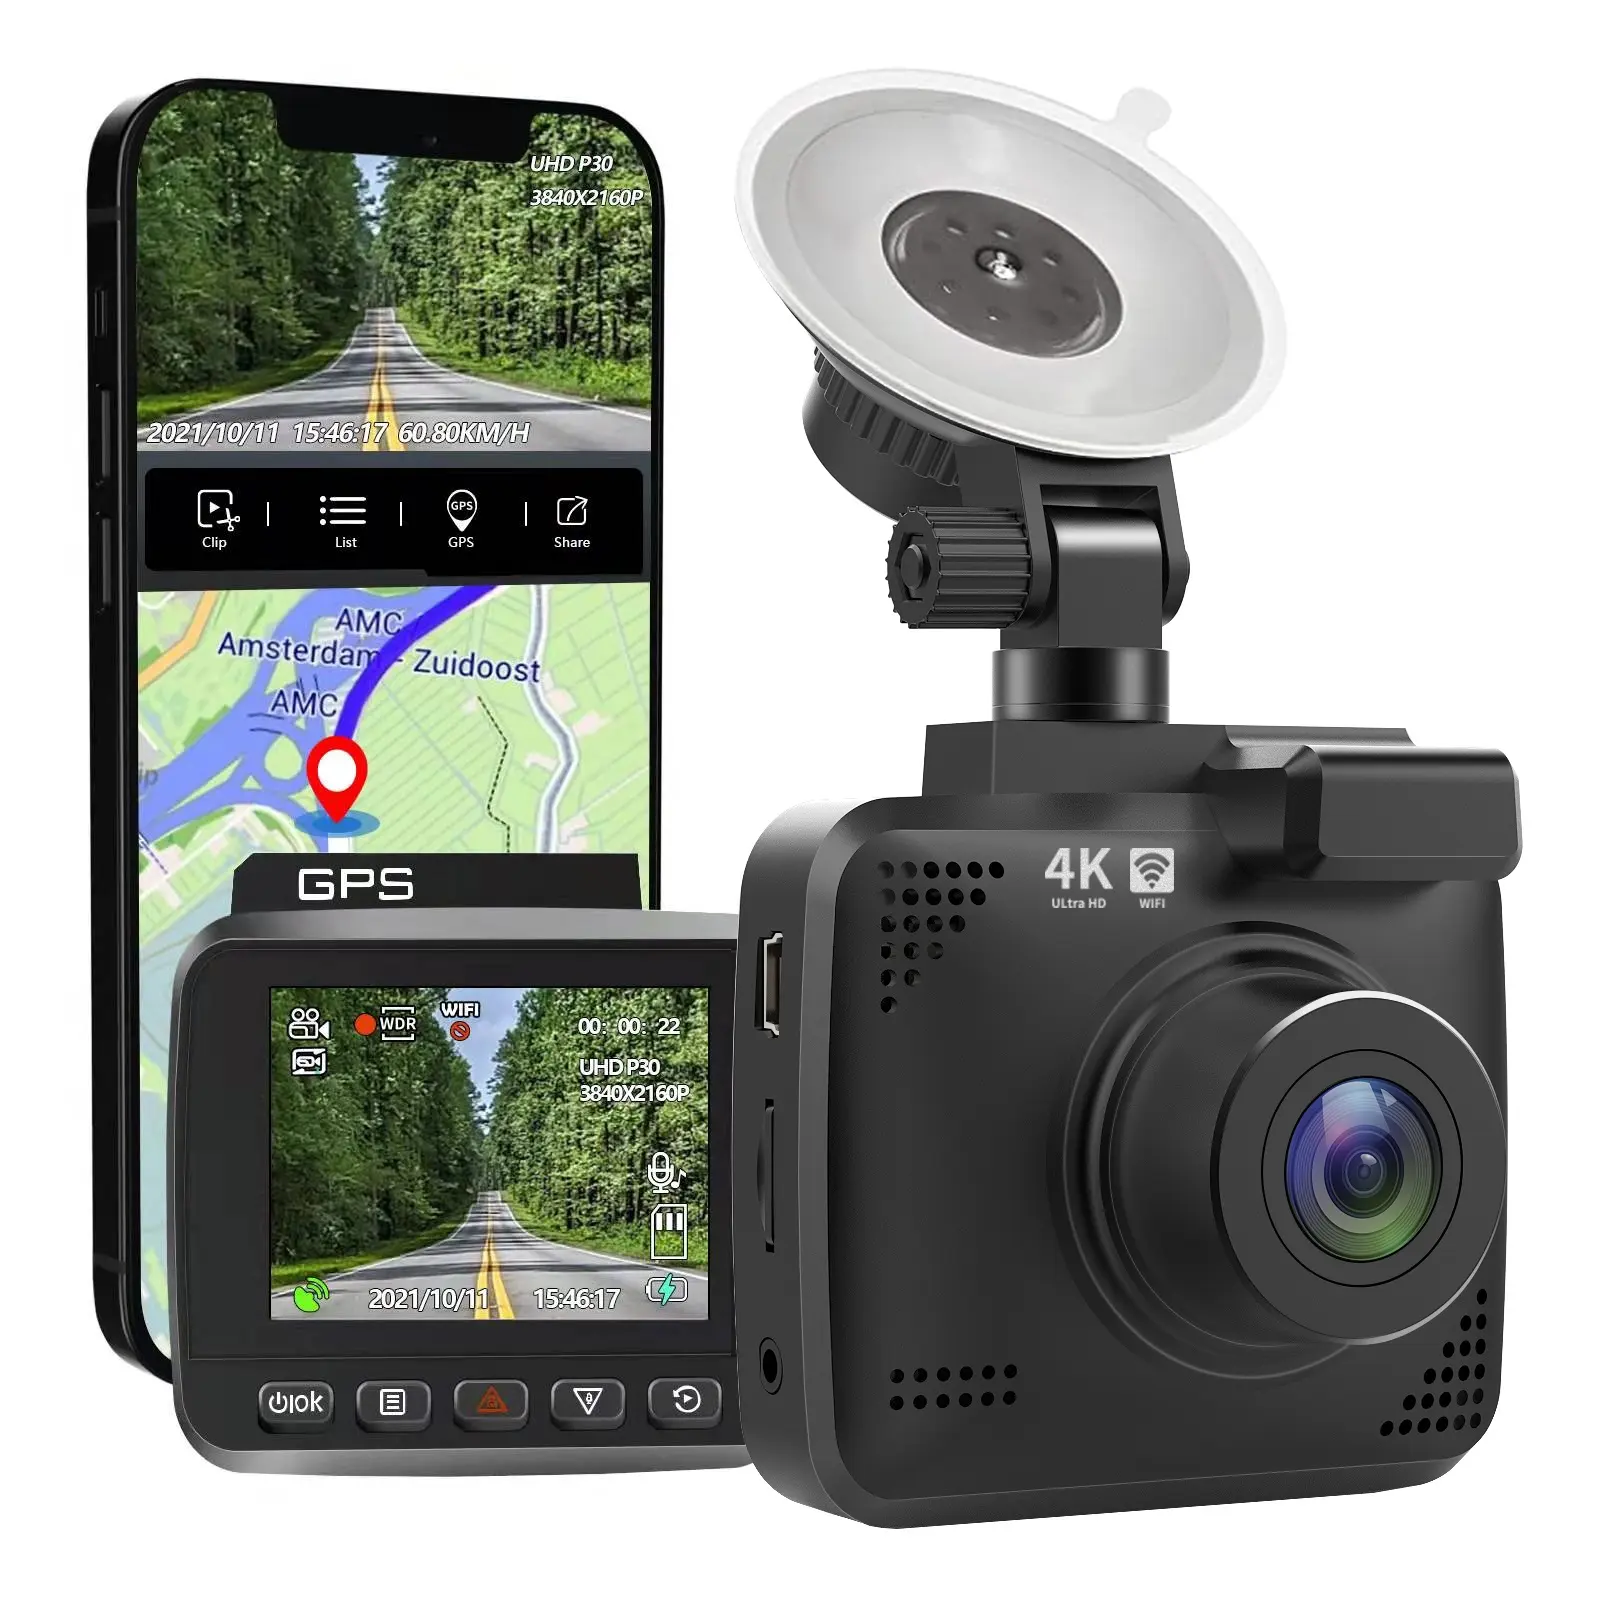 Amazon Best Seller Dash cam 4K 3840*2160P IMX335 Super night vision dash cam with GPS and WIFI Improve for rove r2-4k dash cam